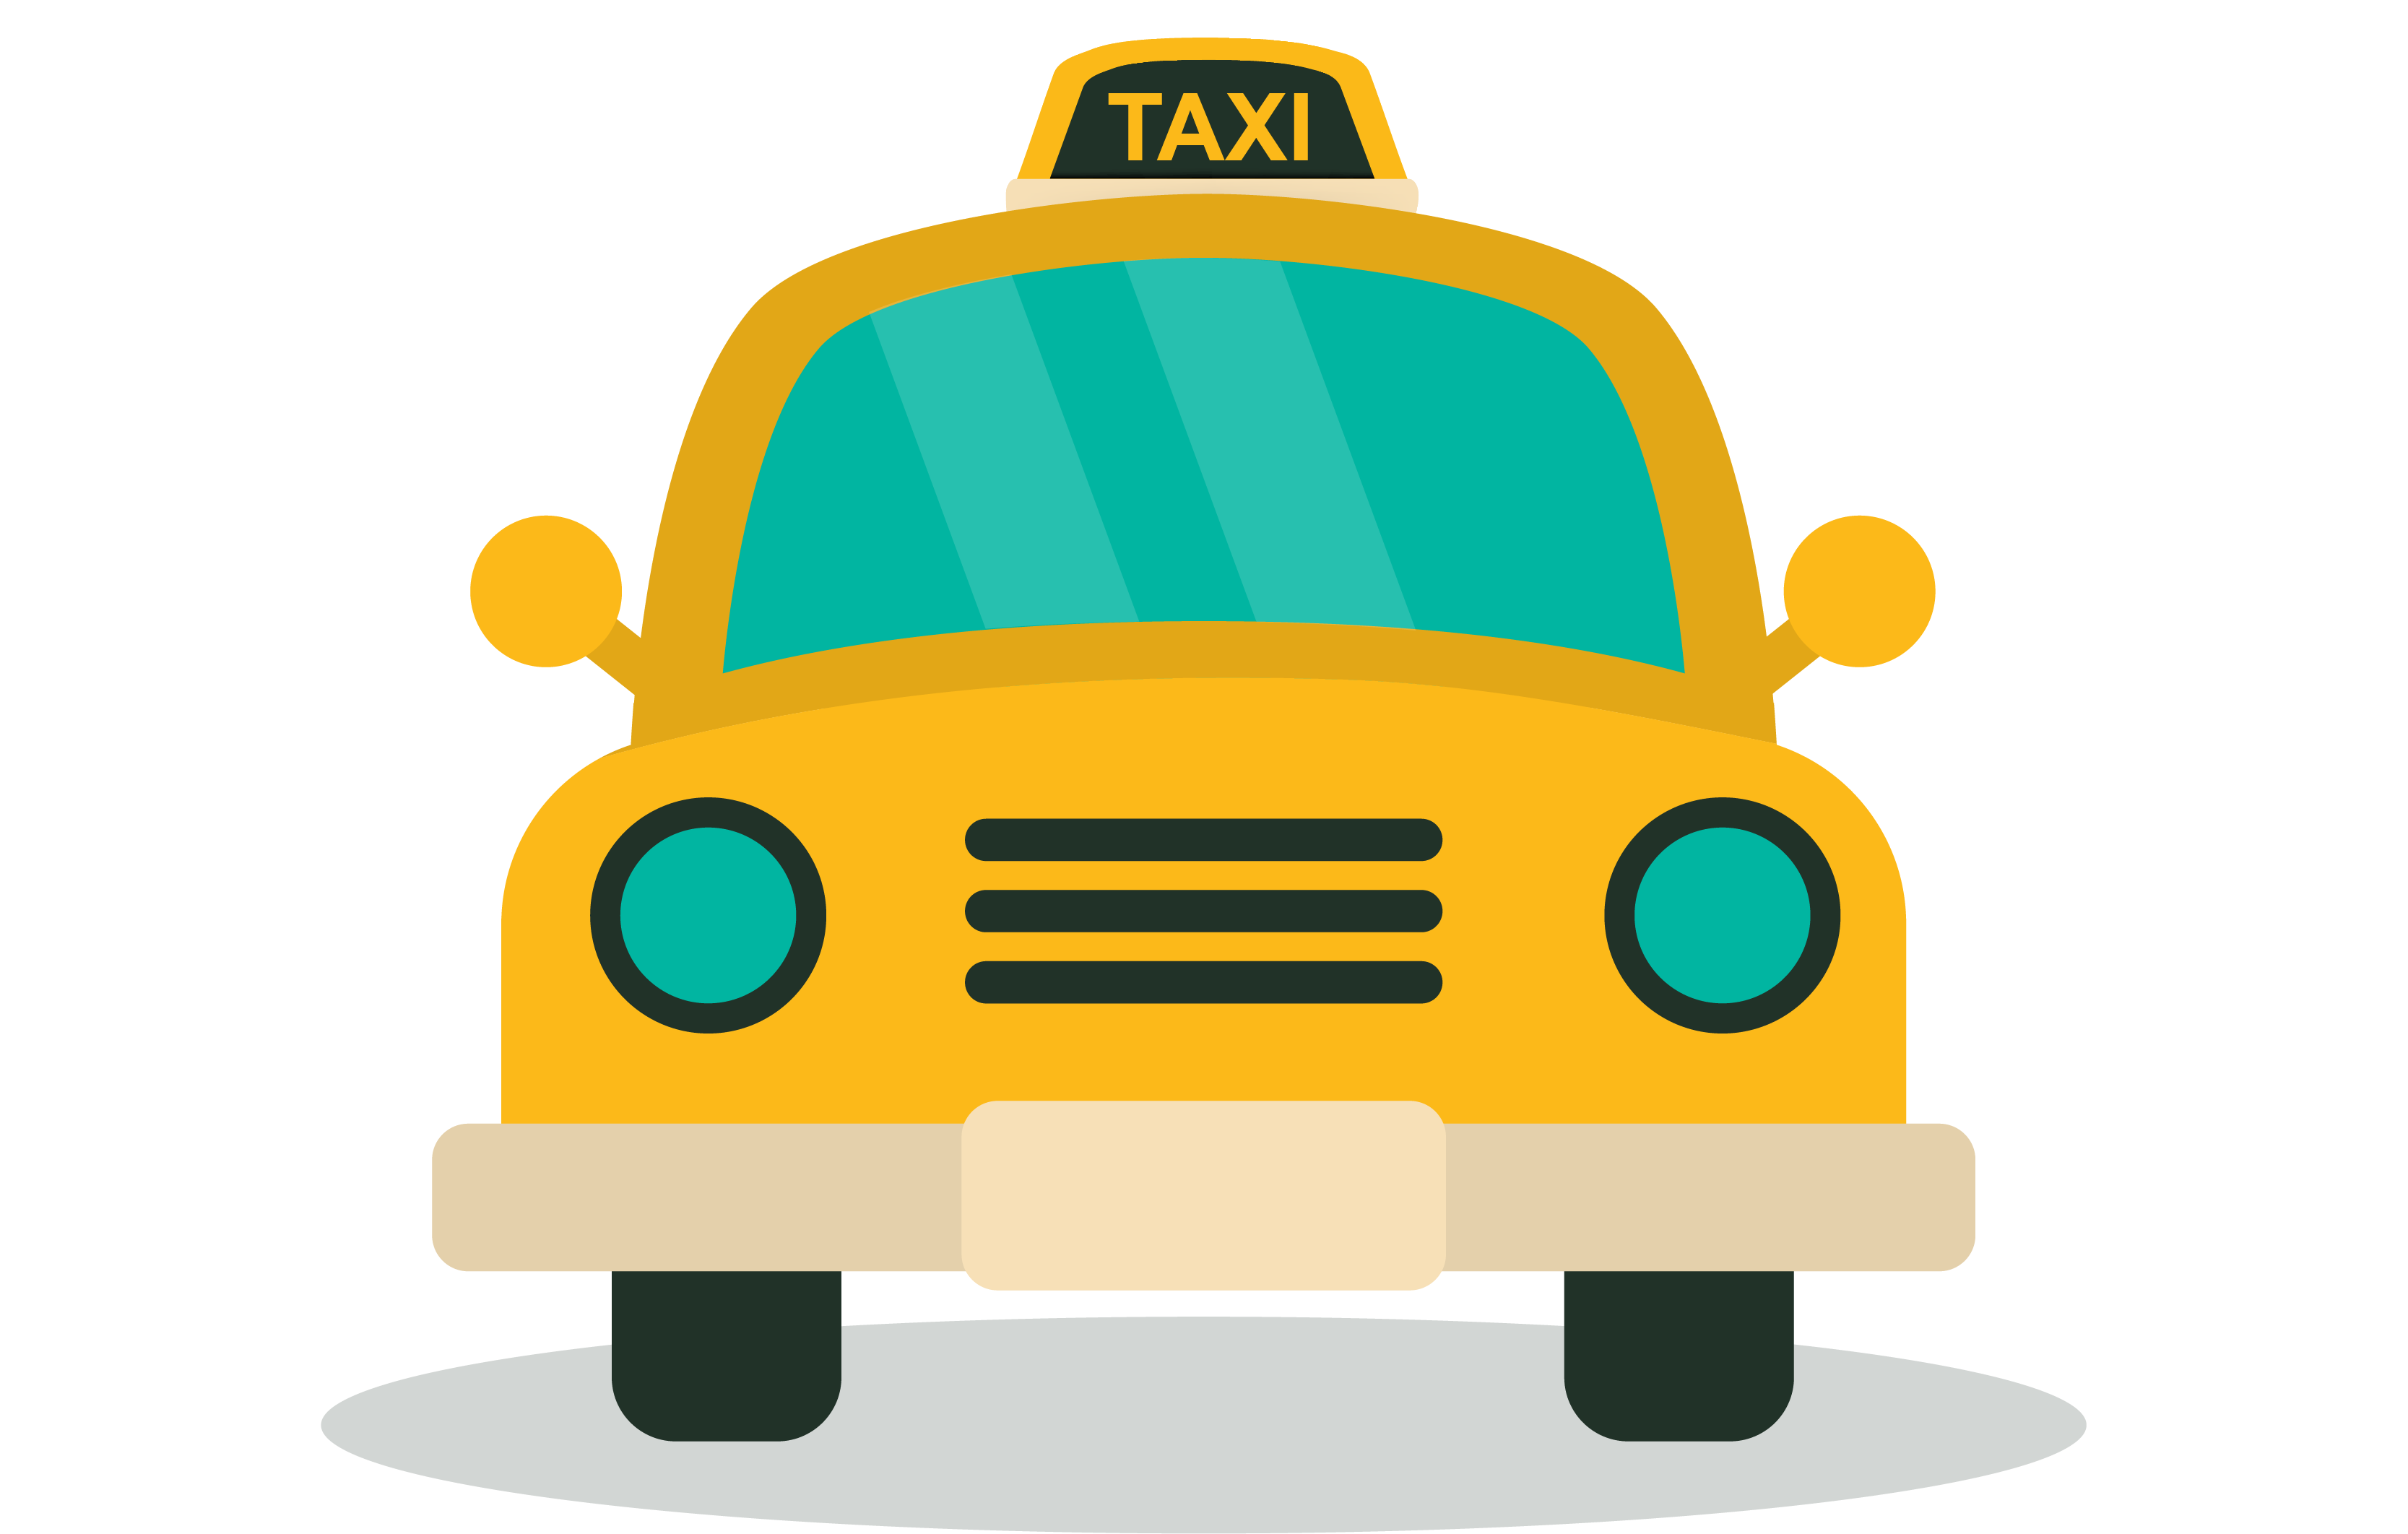 3-01 airport taxi cabs bangalore